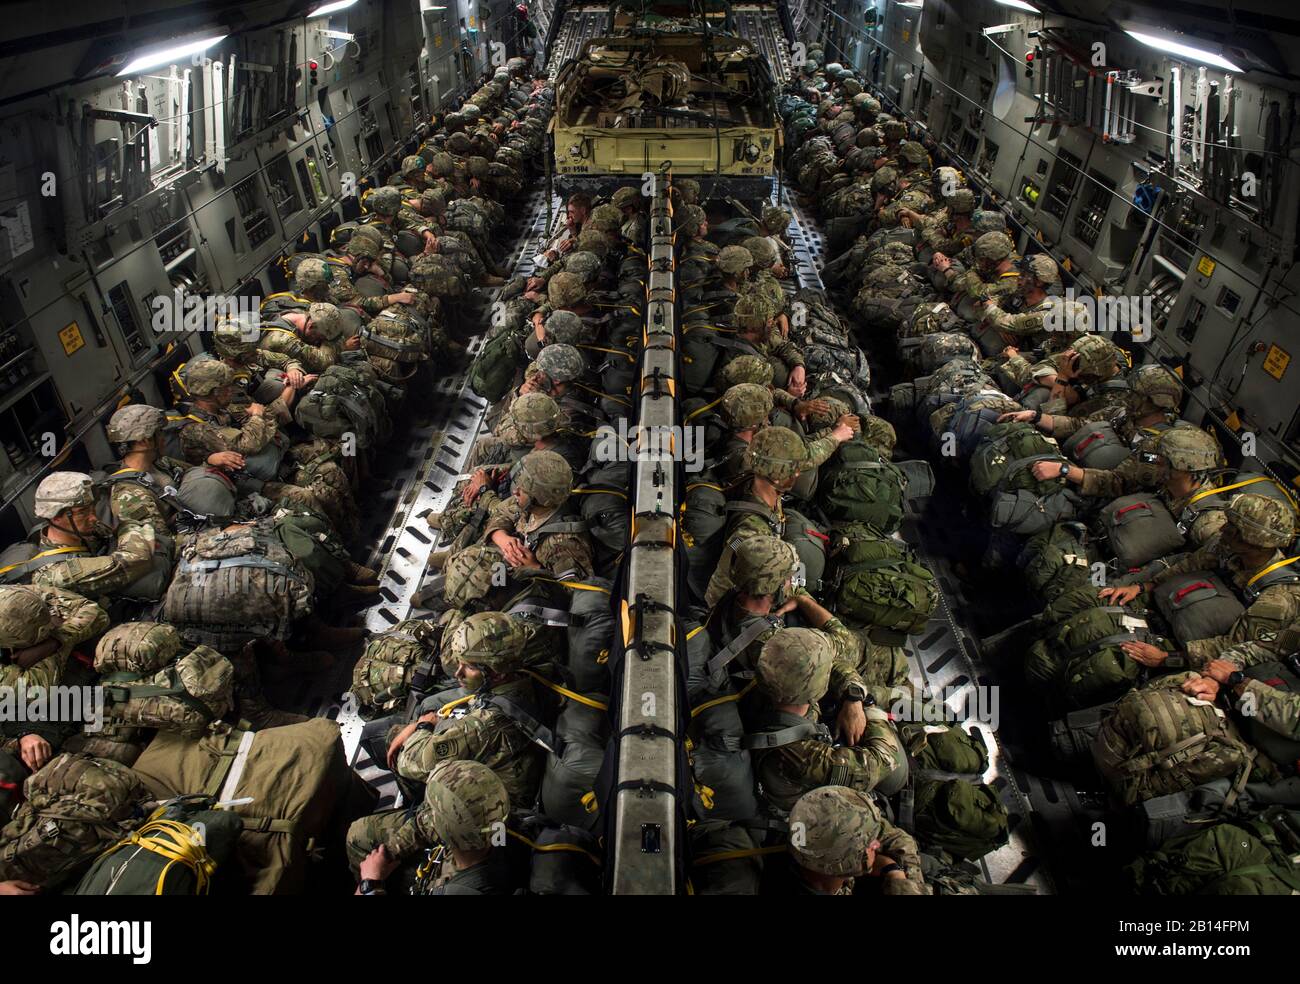 U.S. Soldiers of the 82nd Airborne Division prepare to conduct a static line jump out of a C-17 Globemaster III during exercise Panther Storm at Fort Bragg, North Carolina, July 26, 2017. The deployment readiness exercise tests the division's ability to rapidly deploy its global response force anywhere in the world within a short notice. (U.S. Air Force photo by Staff Sgt. Andrew Lee) Stock Photo